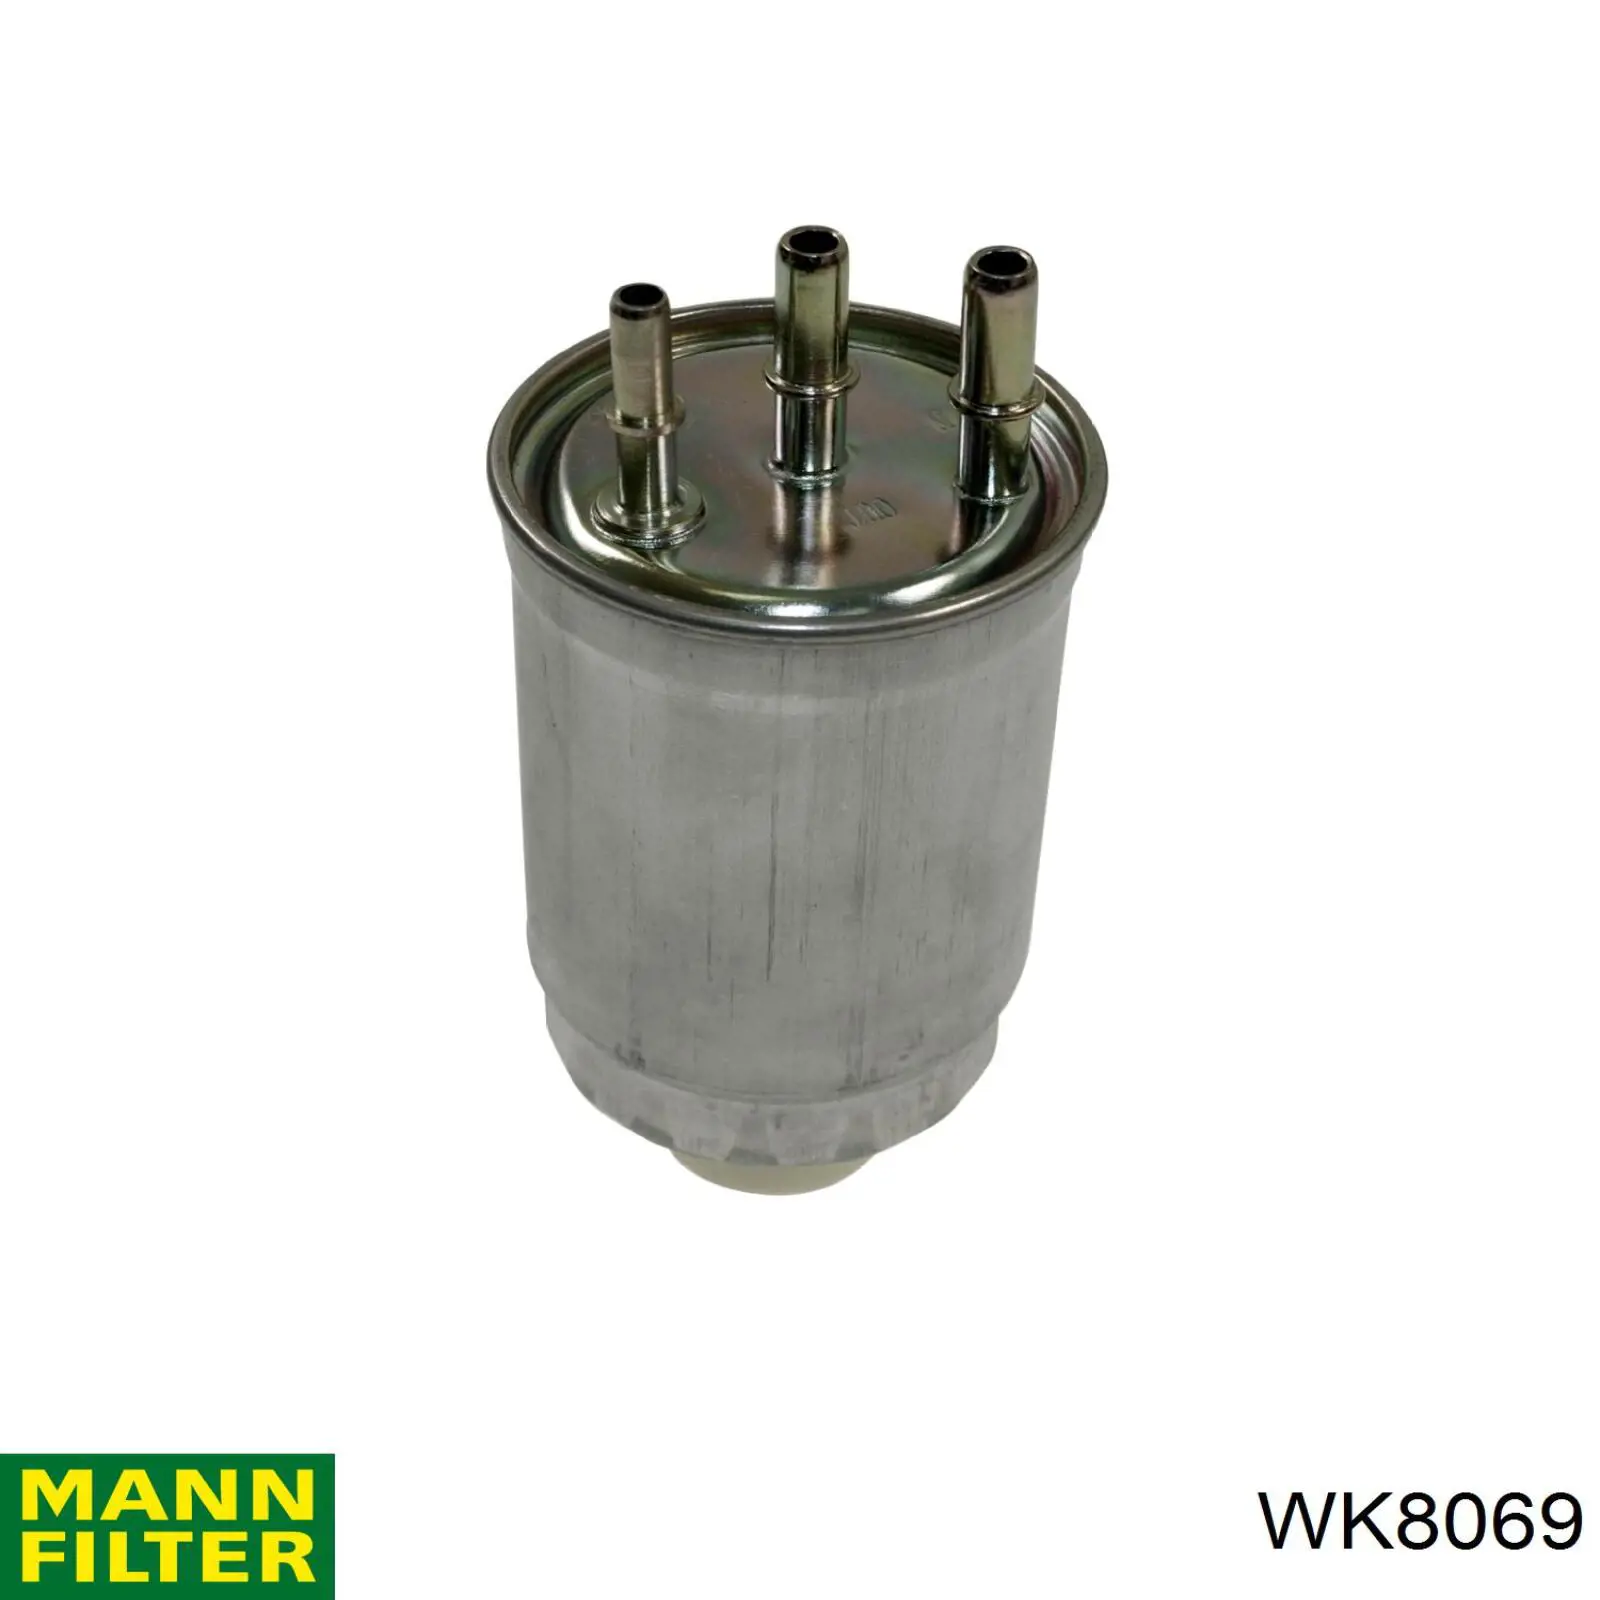 Filtro combustible WK8069 Mann-Filter